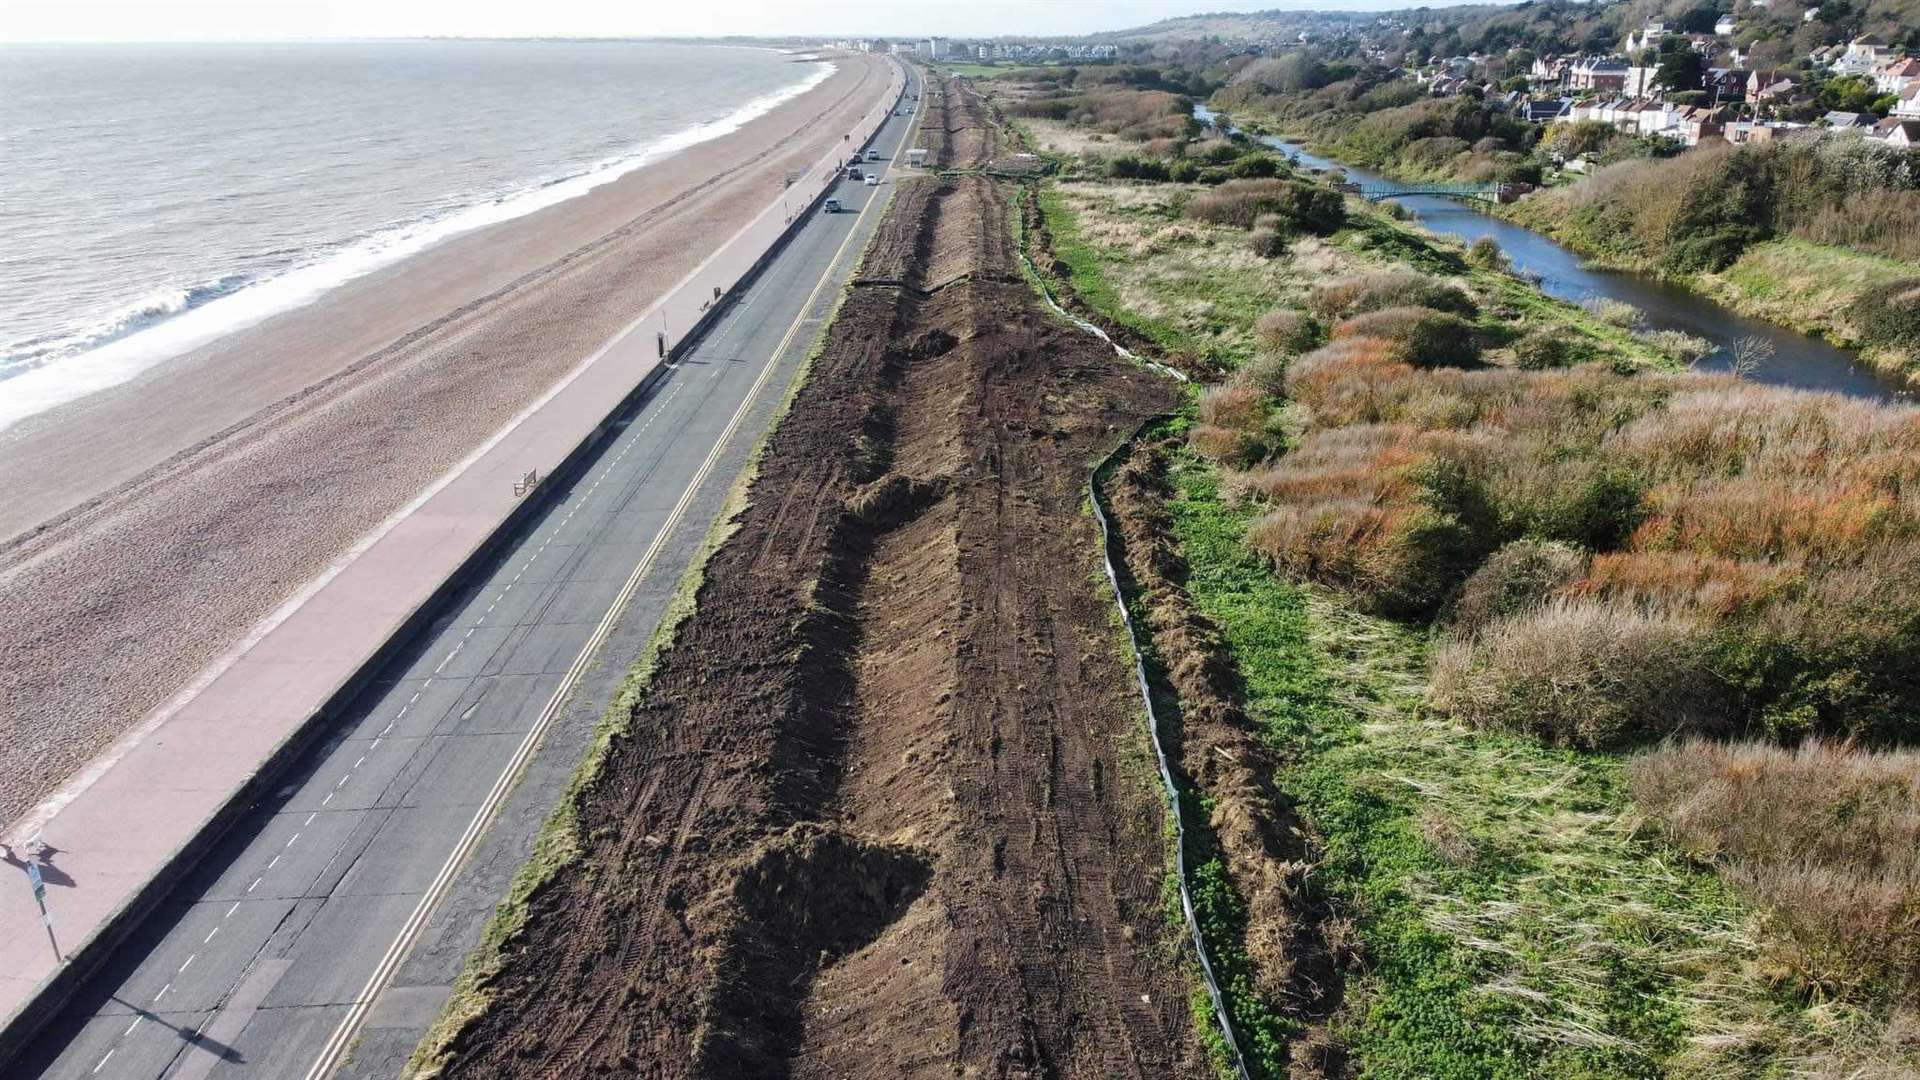 New photos show the loss of vegetation at Princes Parade in Hythe. Photo: Sam Archer